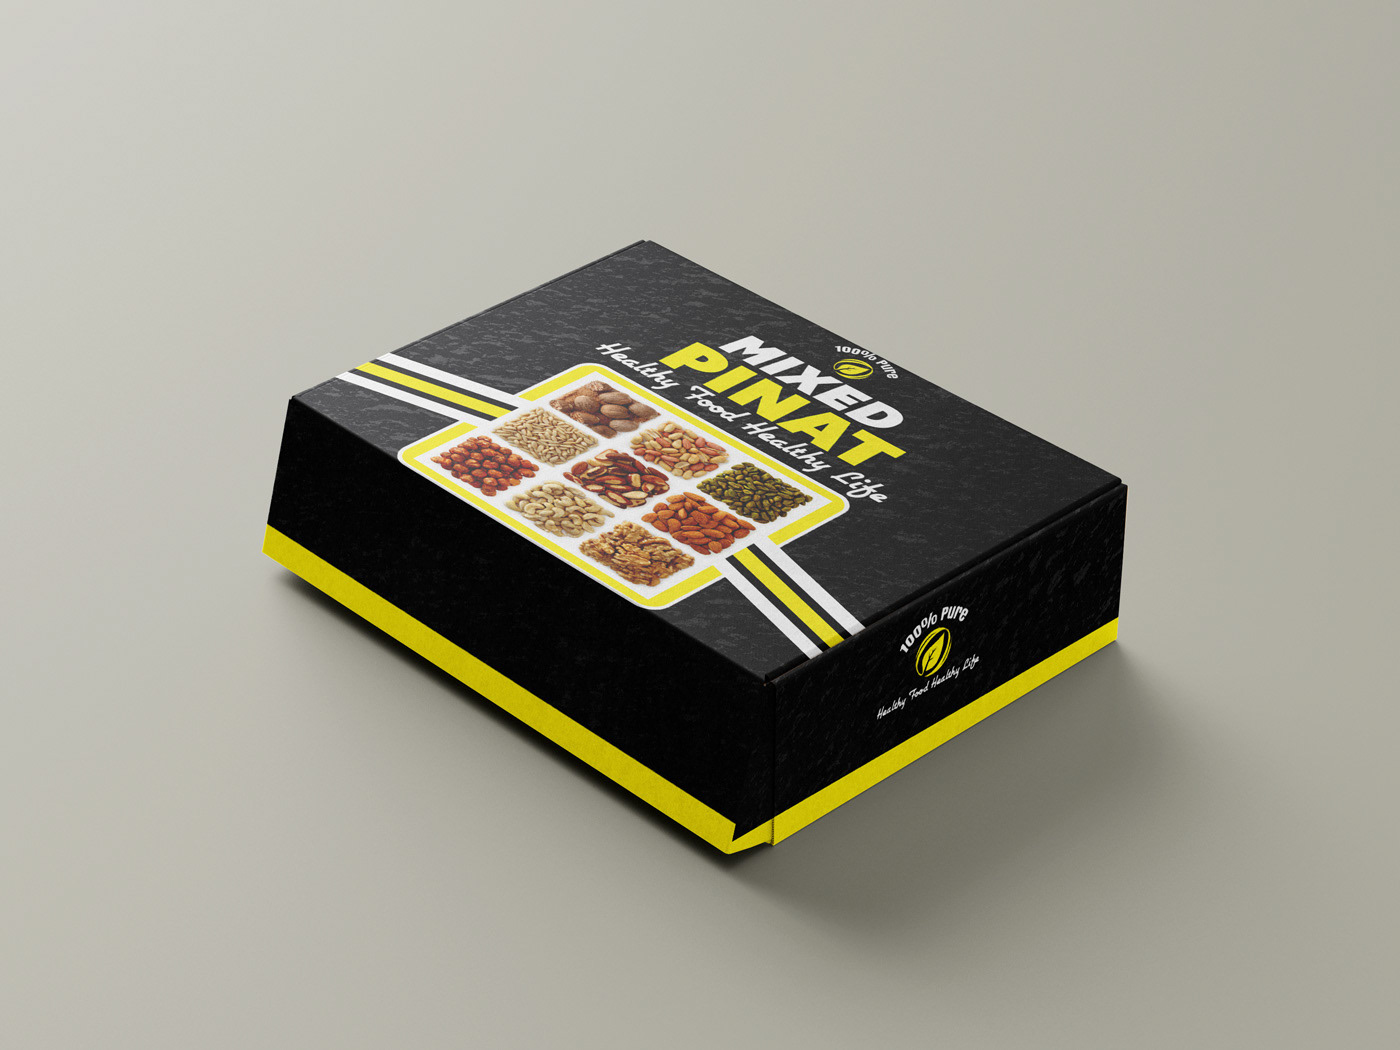 box design product packaging package design  product Packaging product design  packaging design package box gift